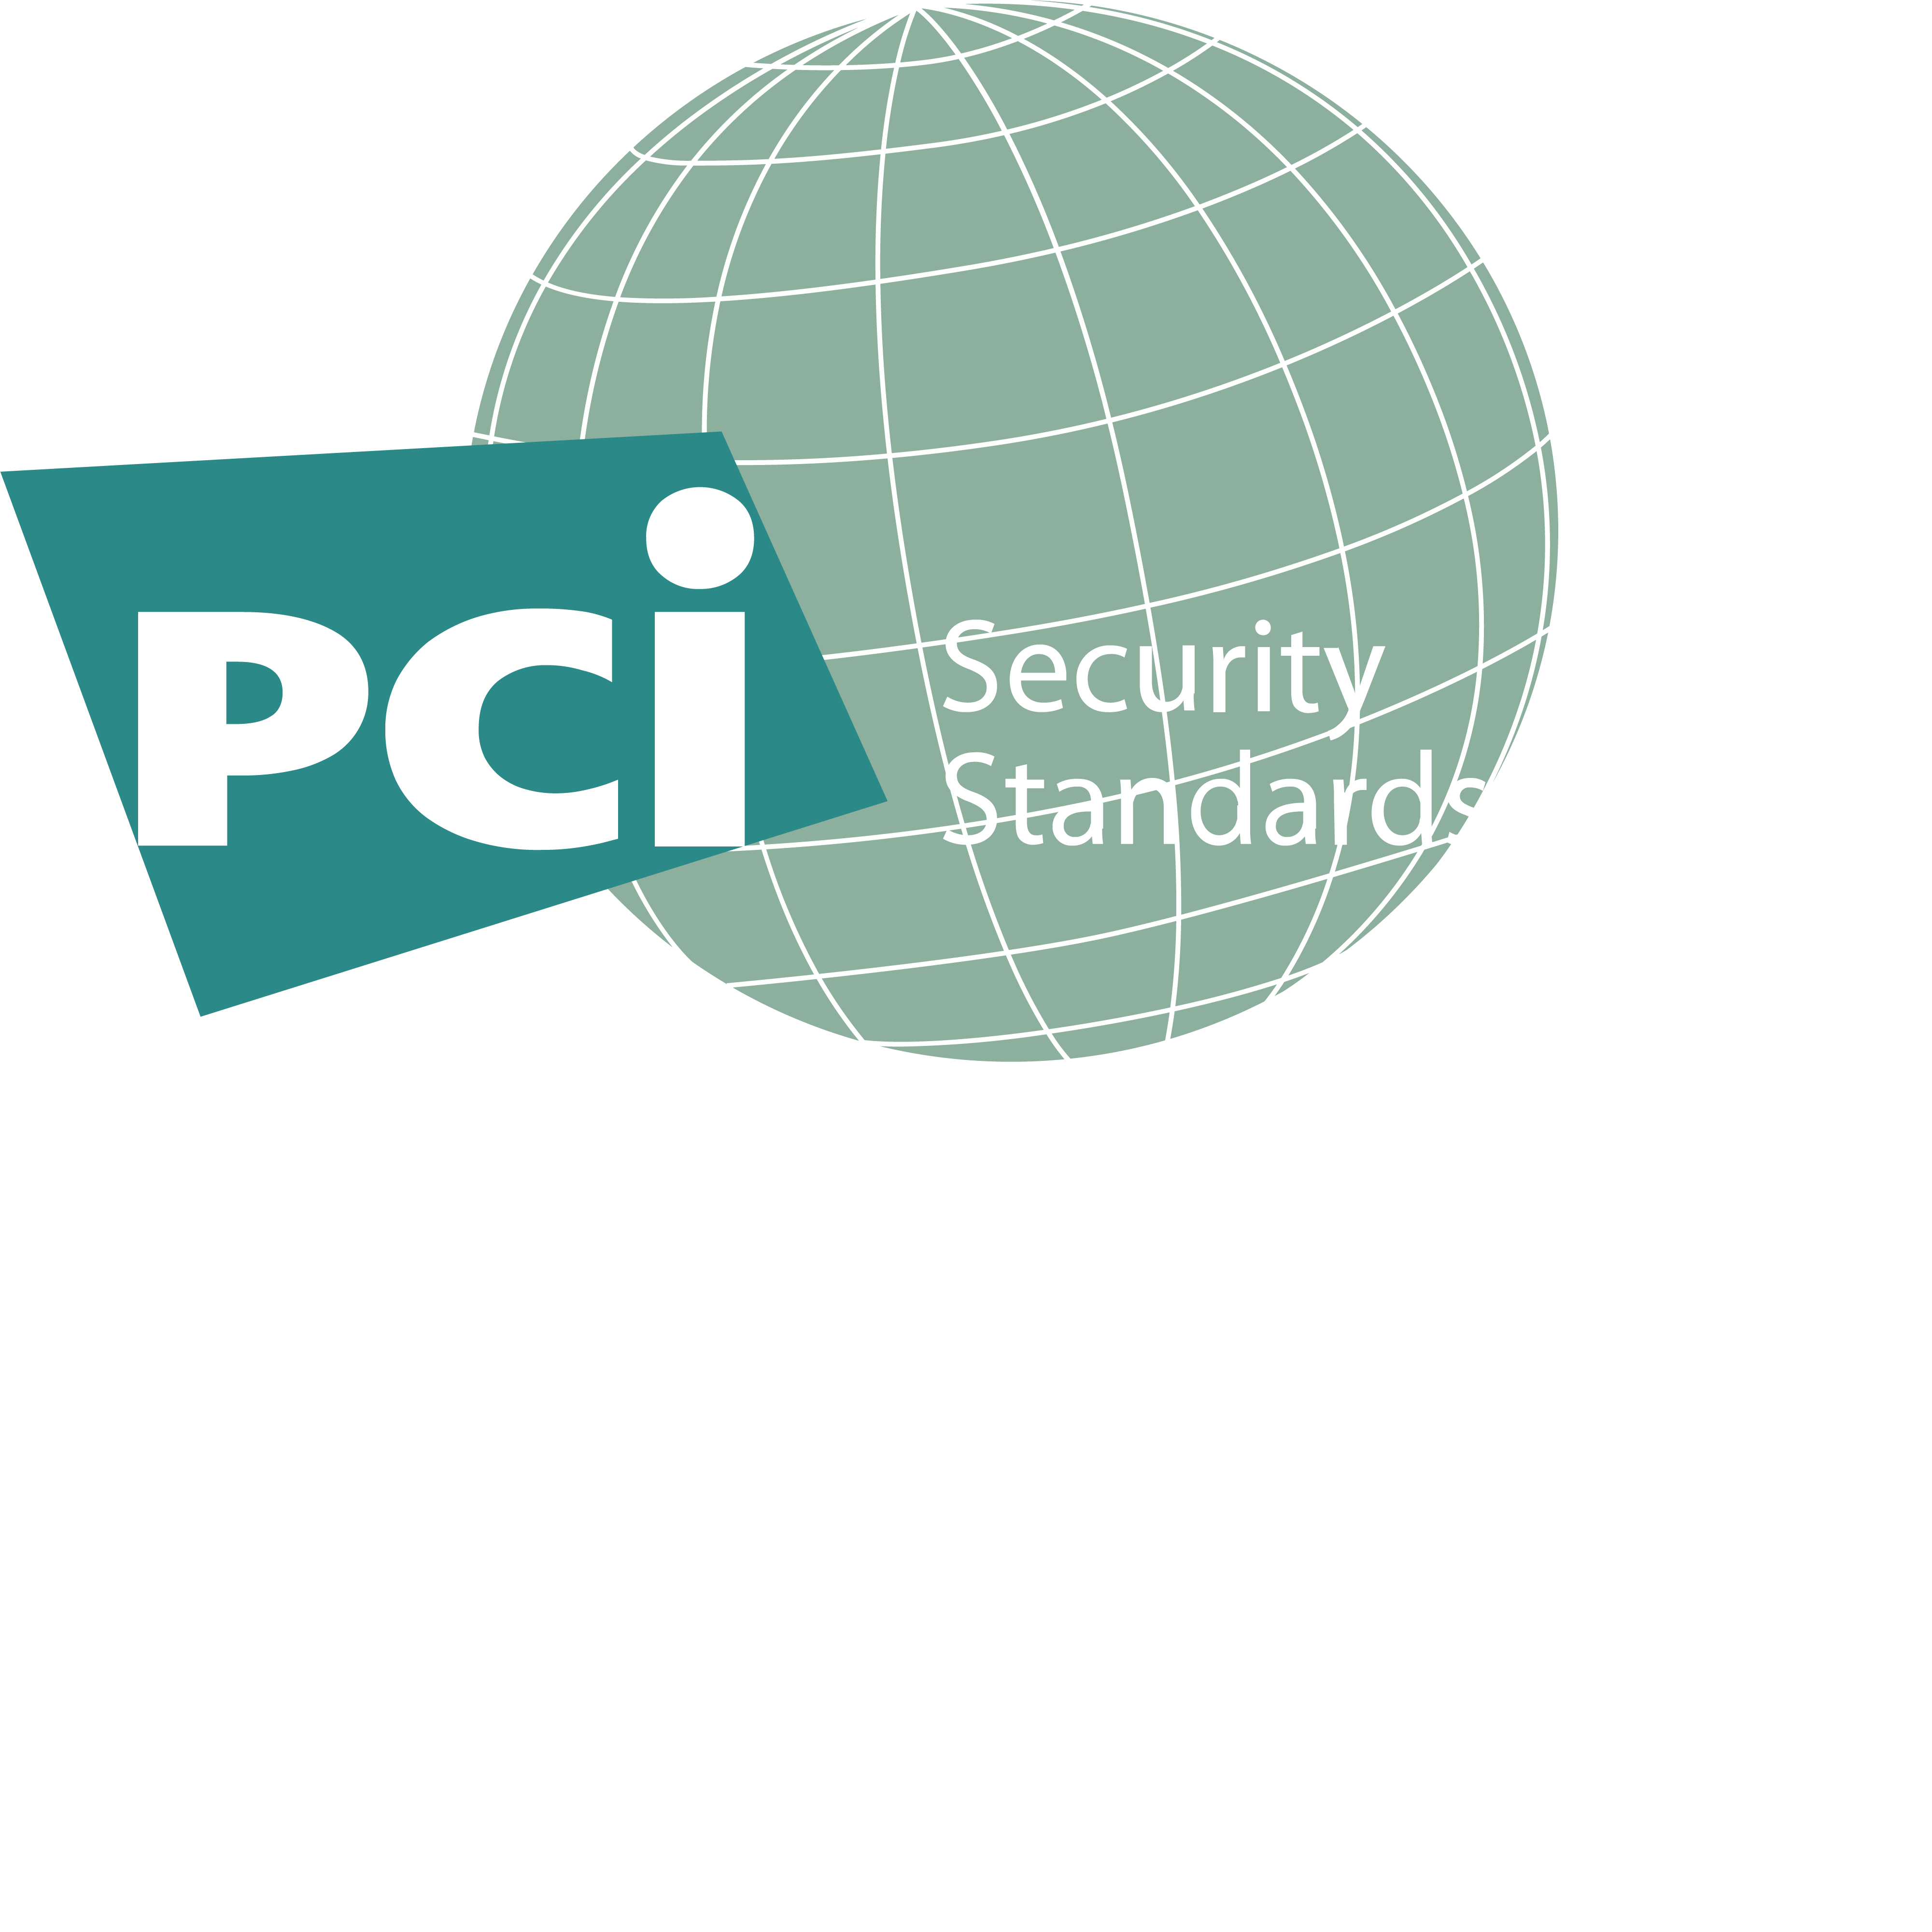 PCI - WE HANDLE PAYMENTS SECURELY